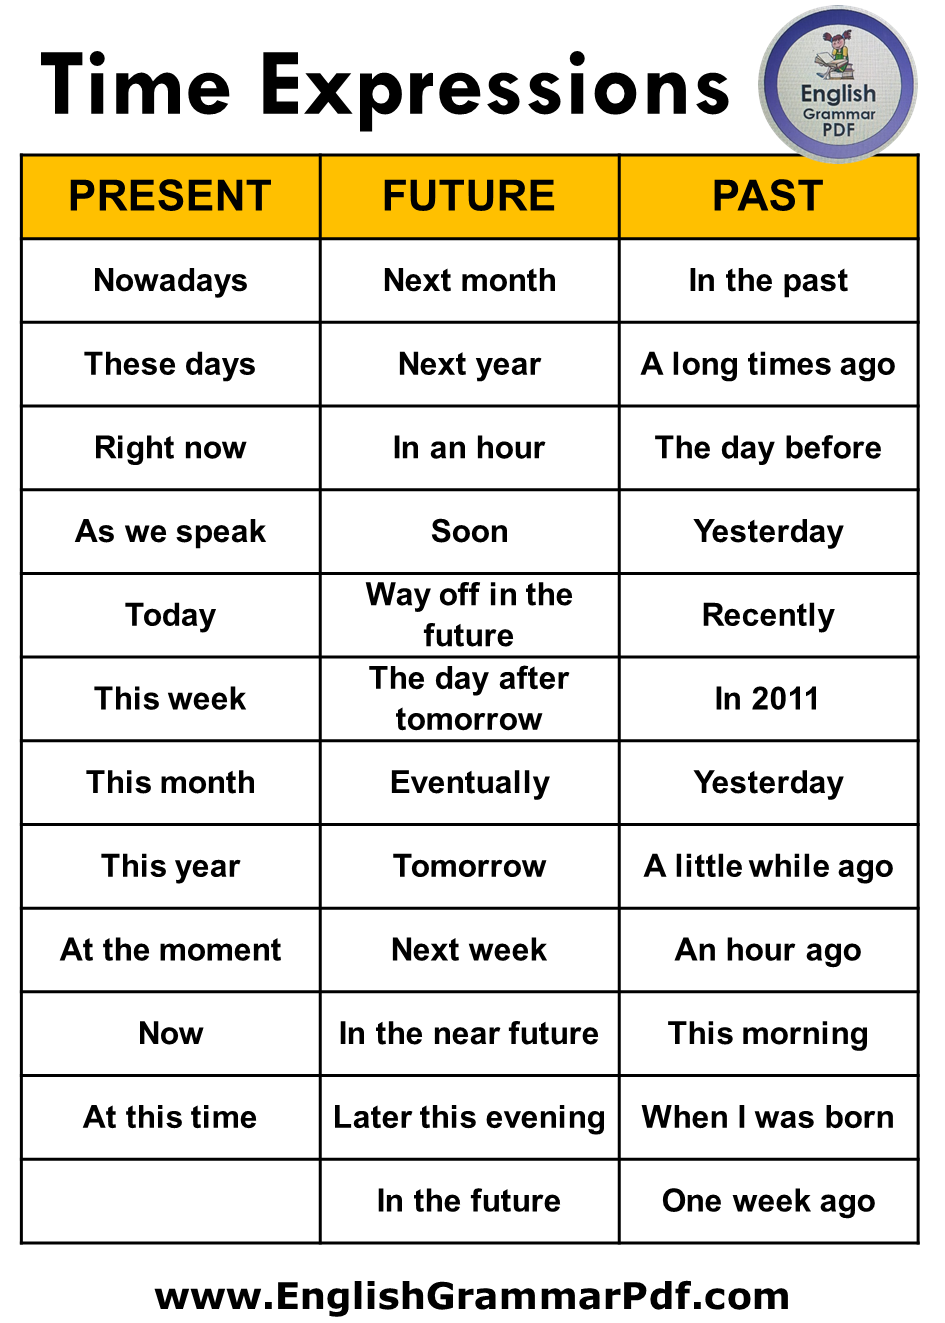 50 Time Expressions Words For Past, Present and Future Tenses